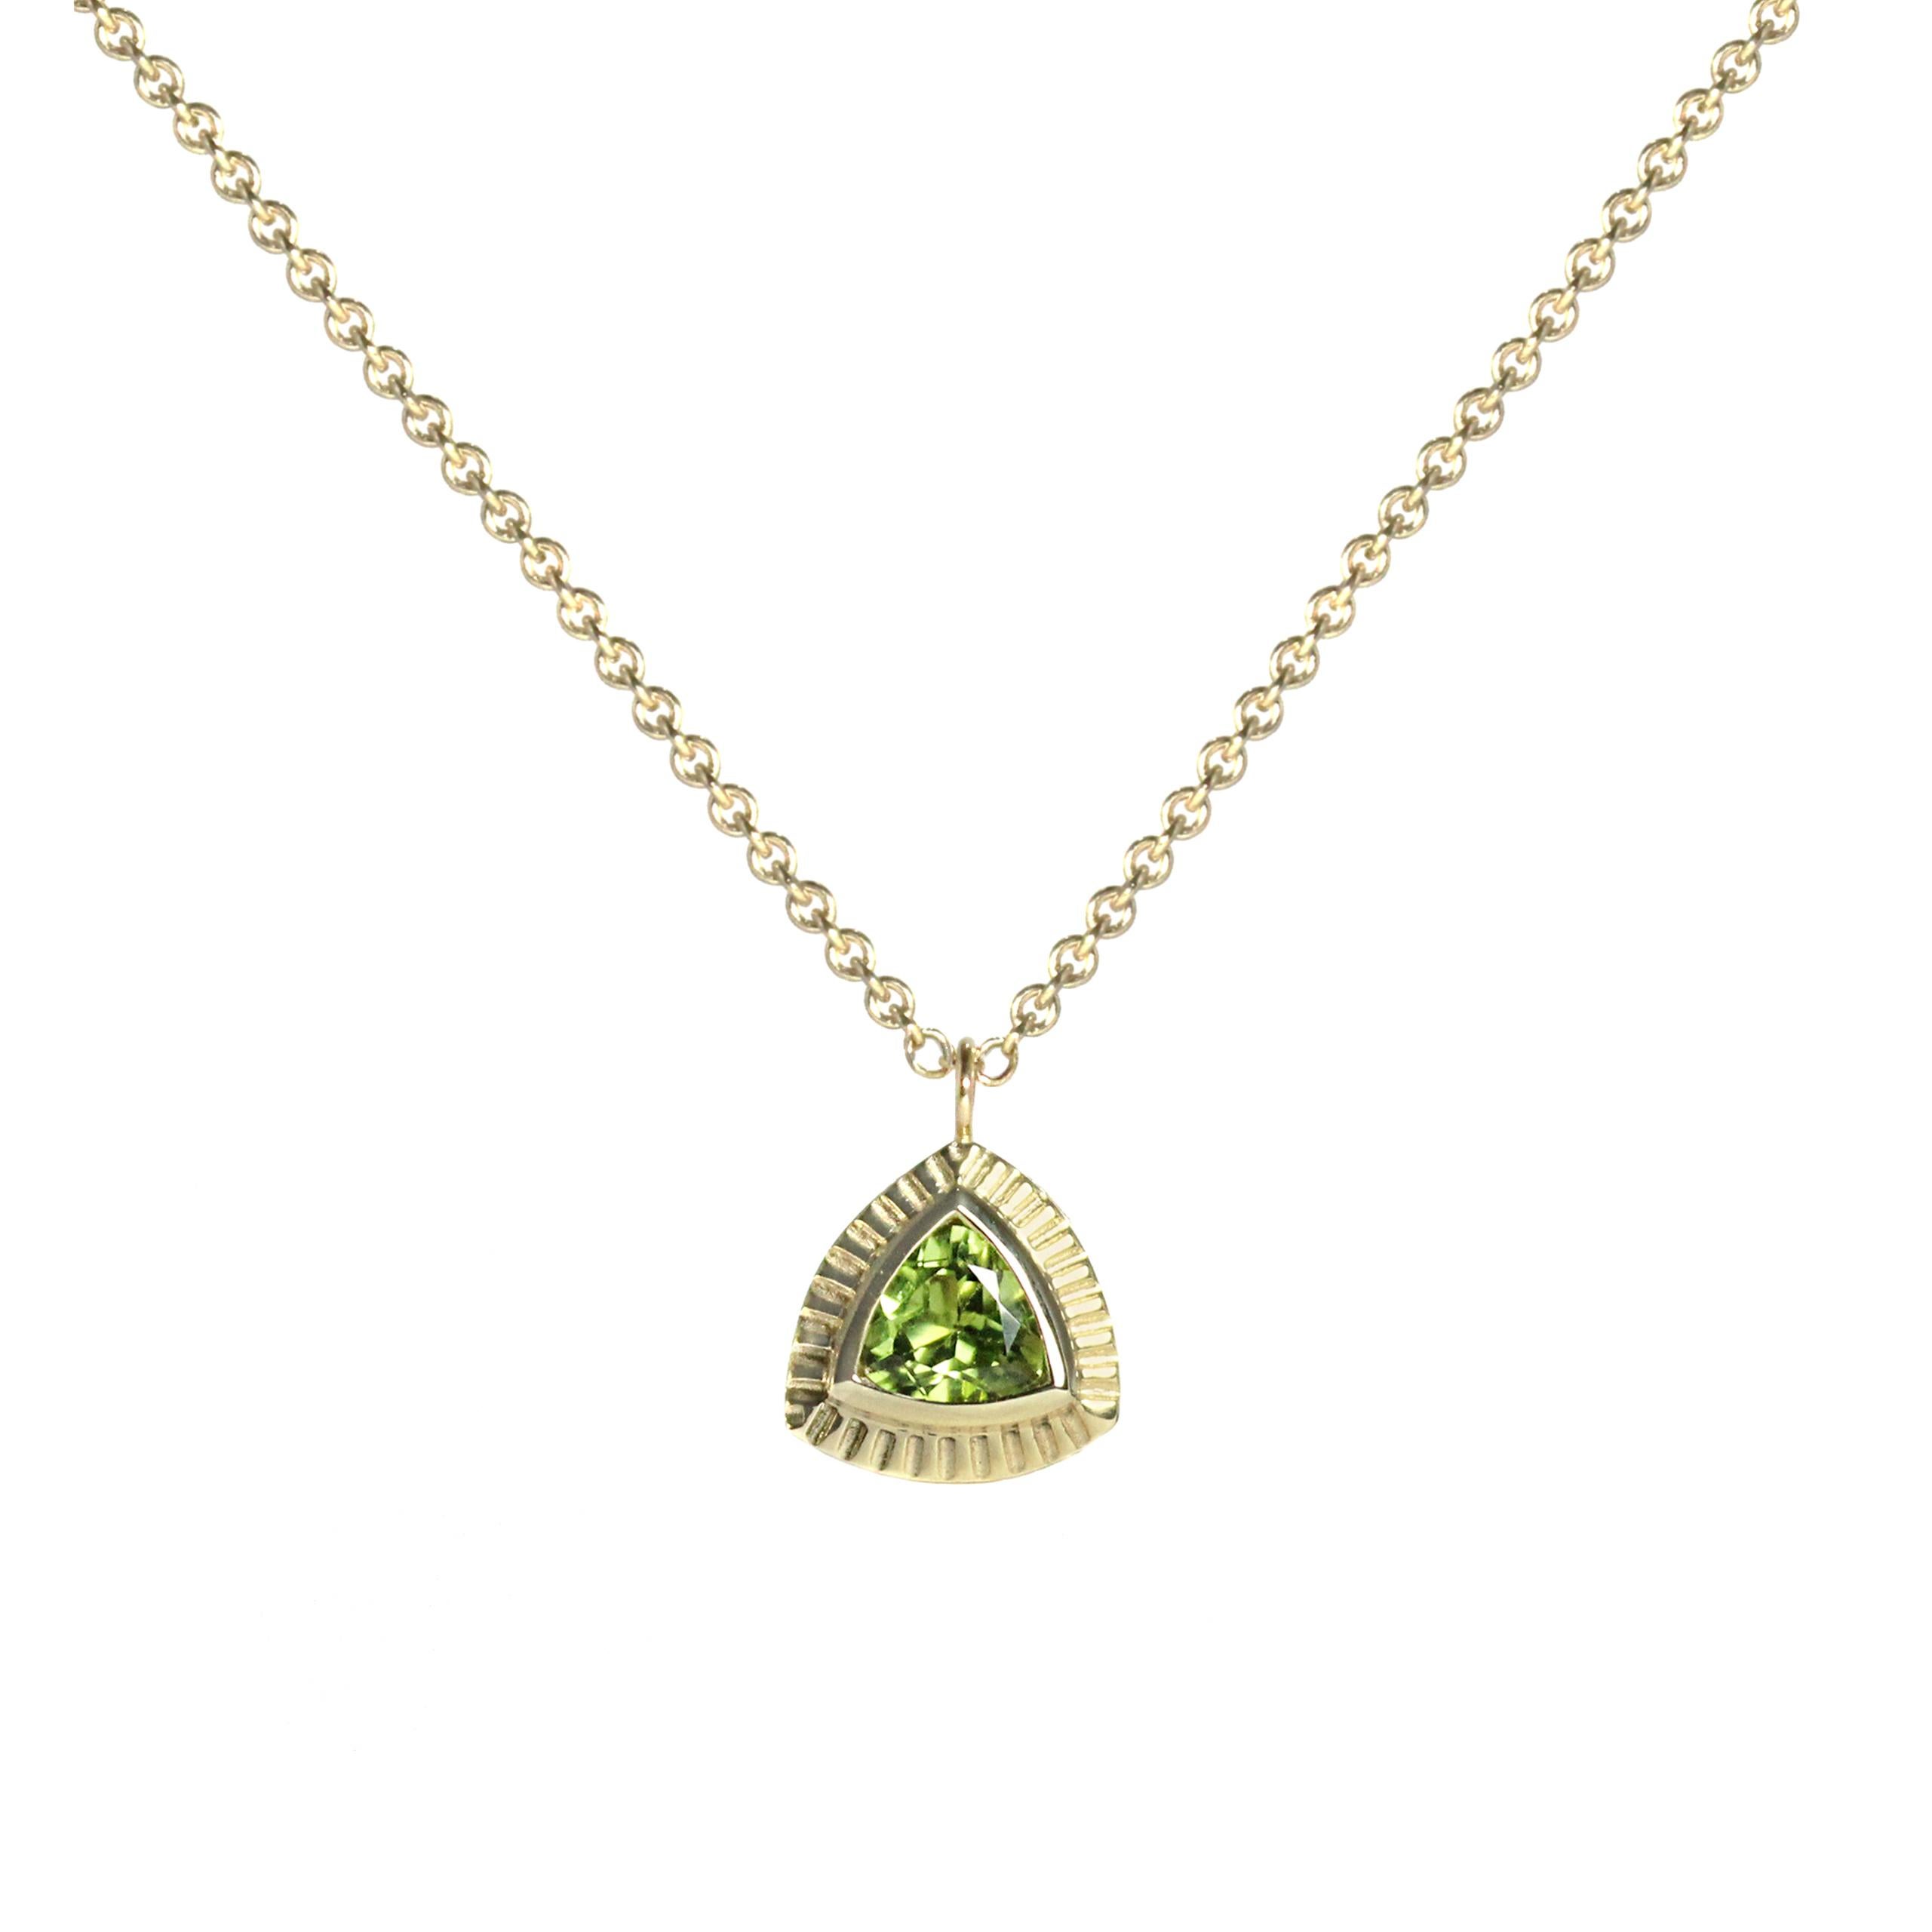 Contemporary Emily Kuvin Gold and Green Tourmaline Trillion Necklace